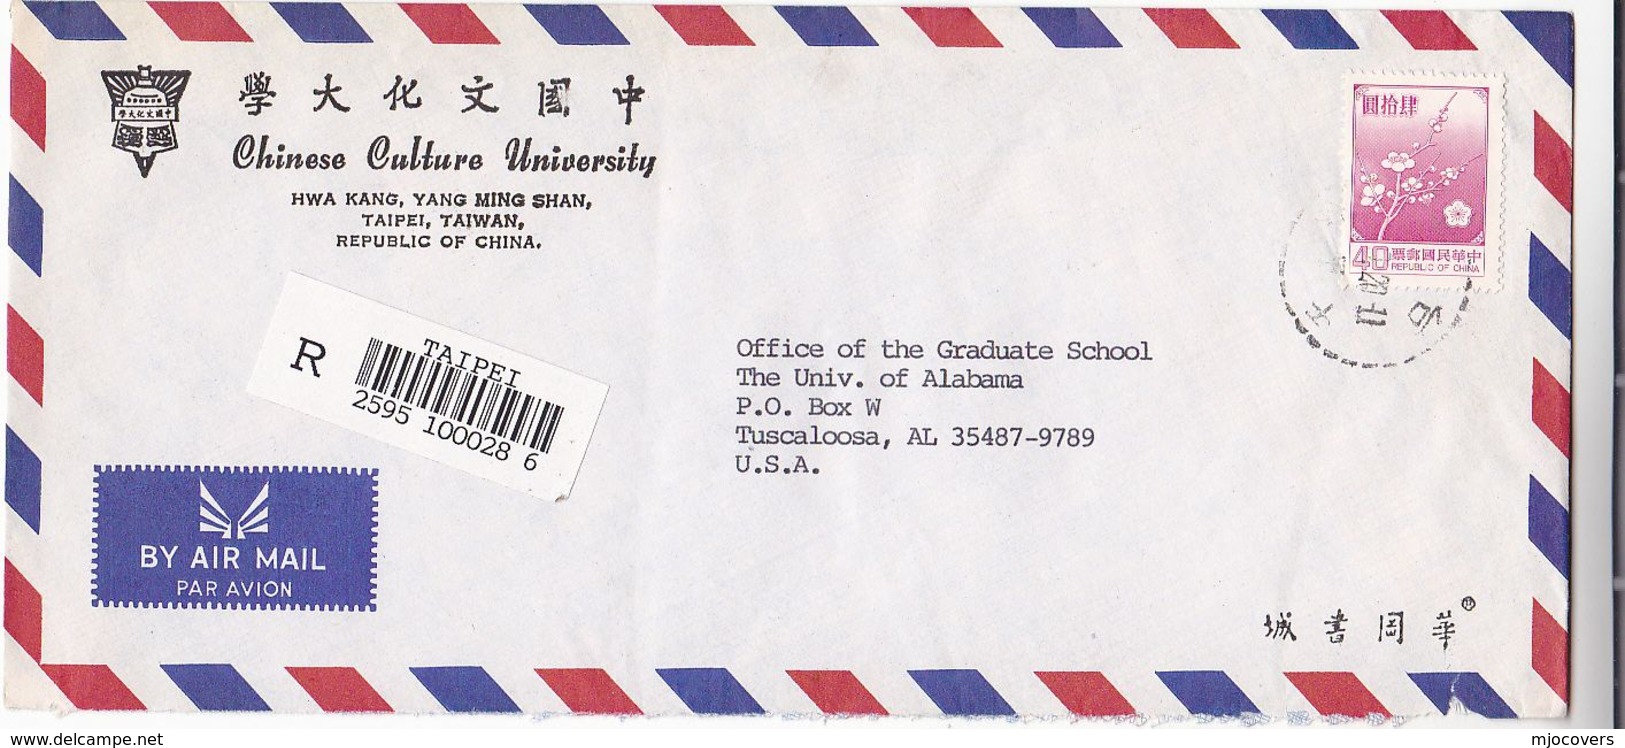 REGISTERED Taipei TAIWAN CHINESE CULTURE UNIVERSITY  COVER Stamps  To USA China - Covers & Documents